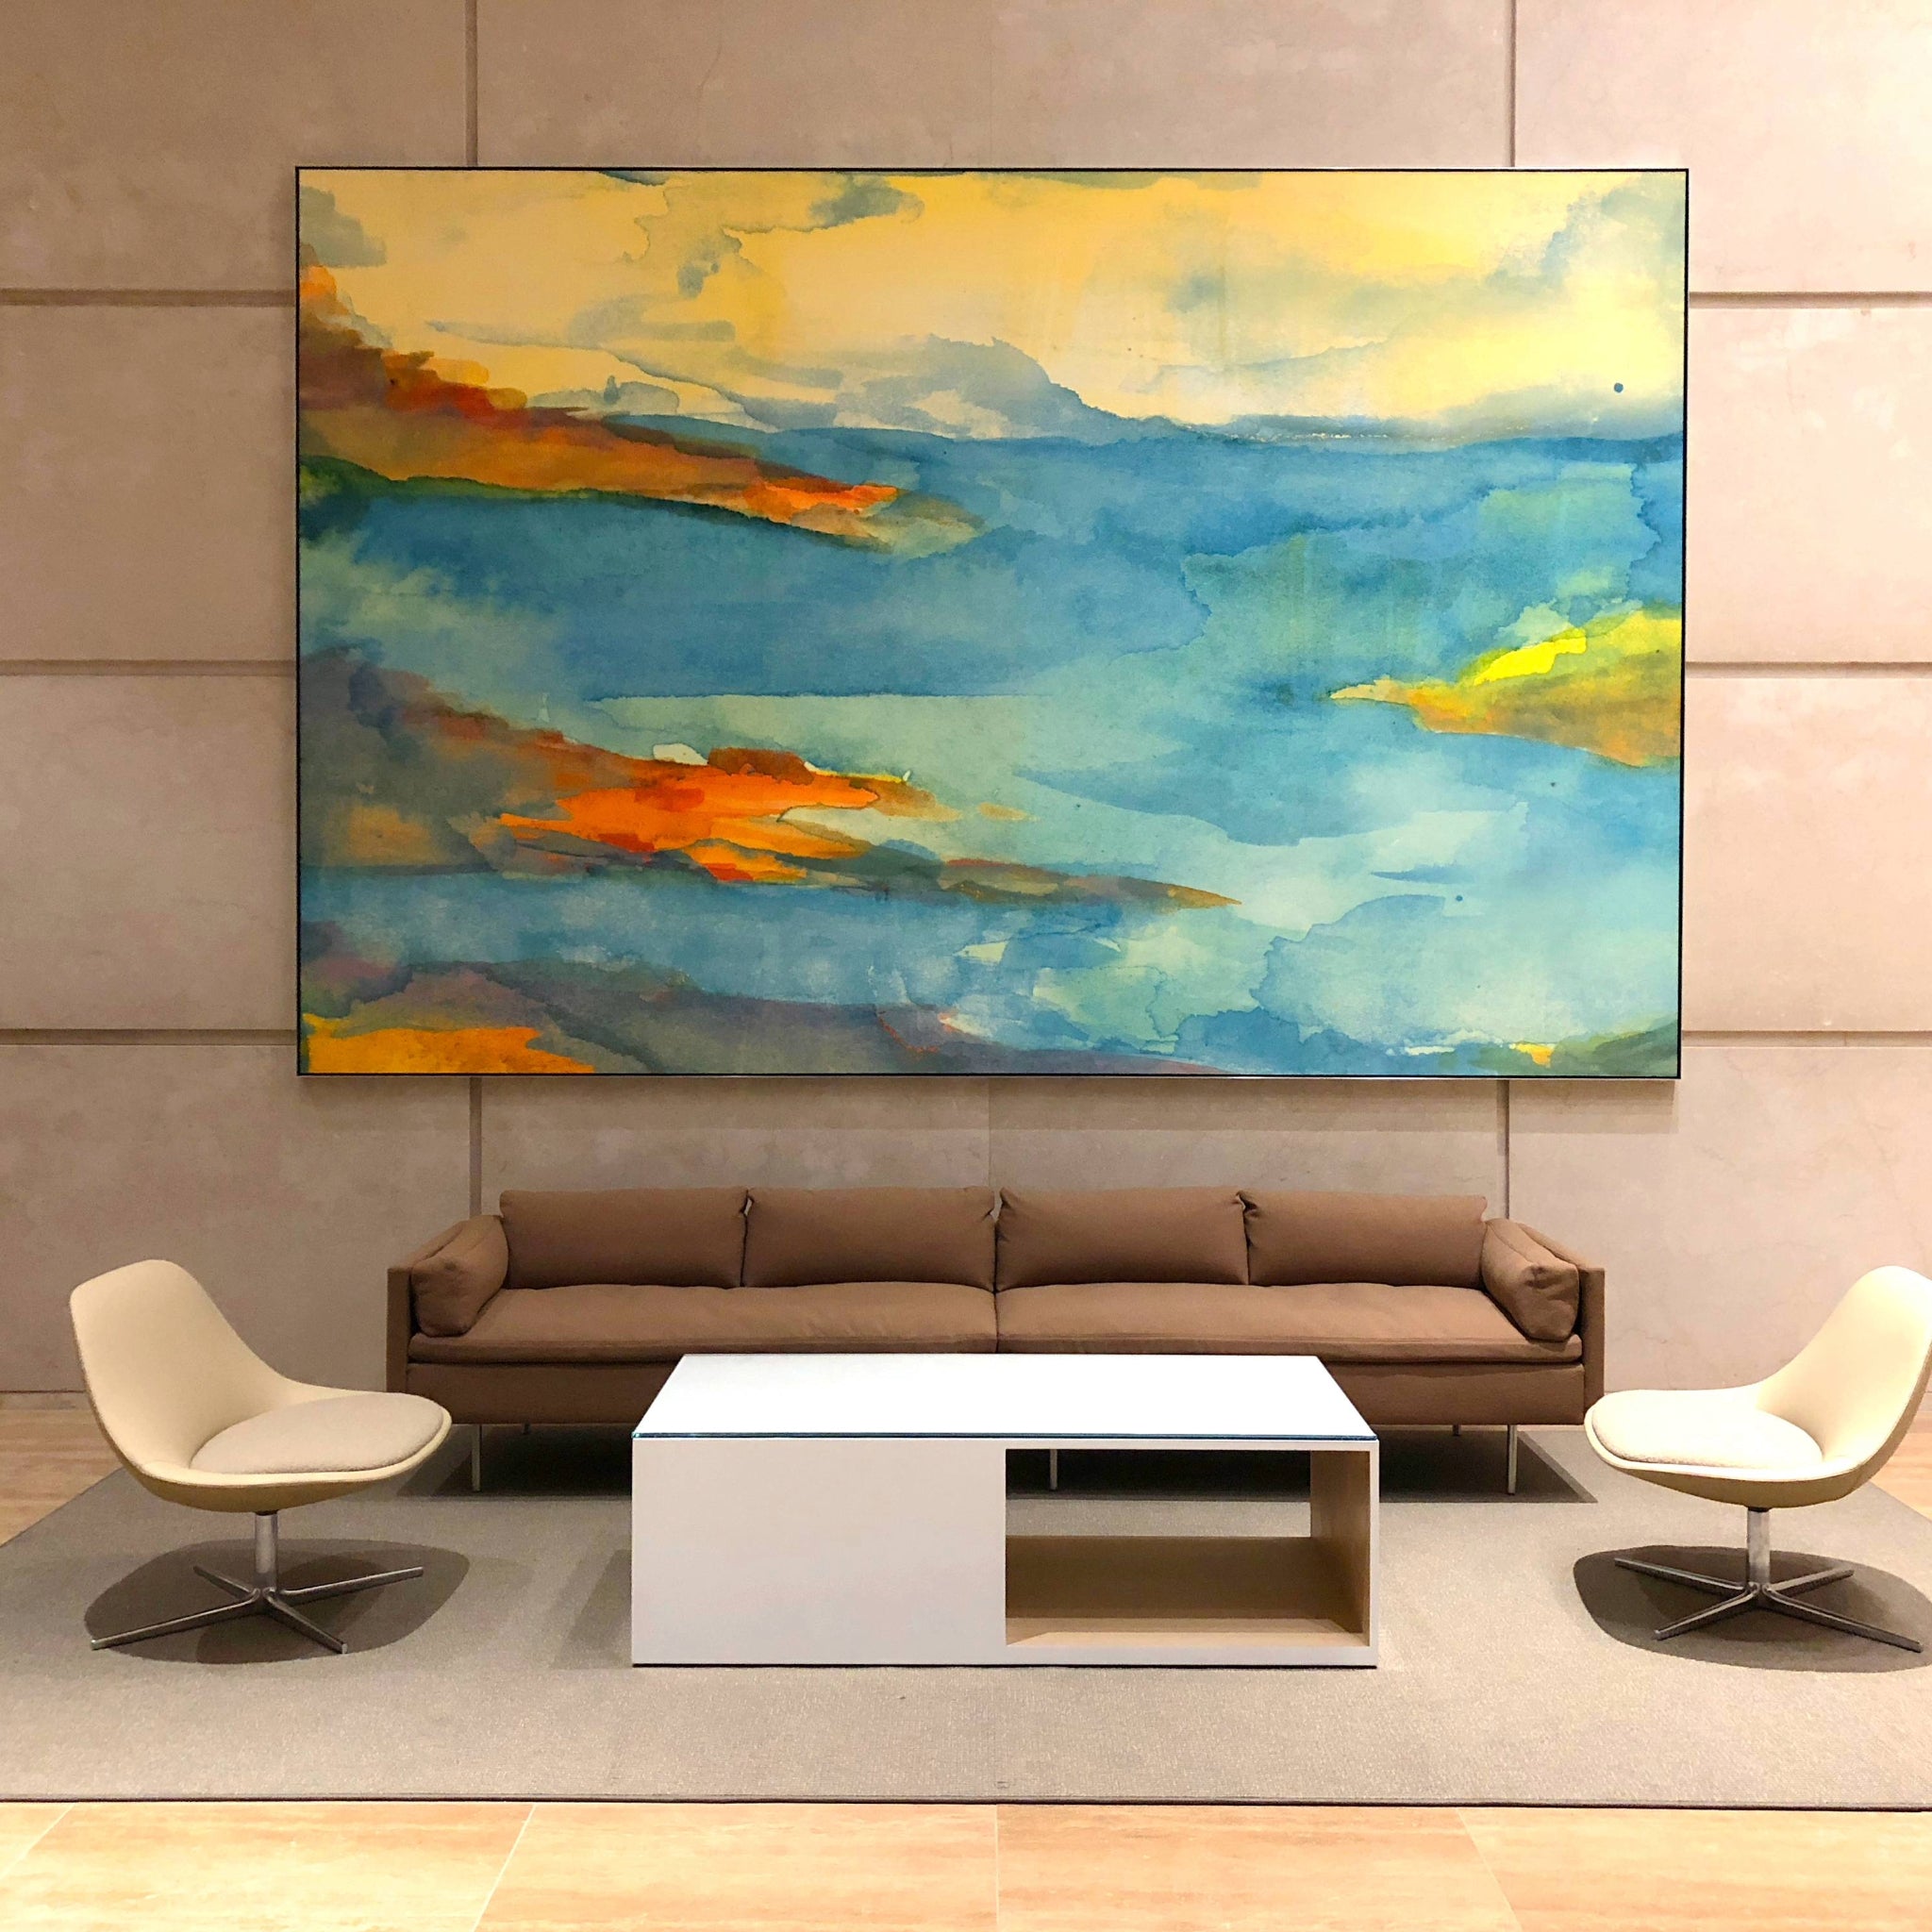 Lobby of 100 Spectrum featuring a serene large abstract painting by WRAPPED Studio, with bold blue and yellow tones evoking a sense of calm in the corporate environment.